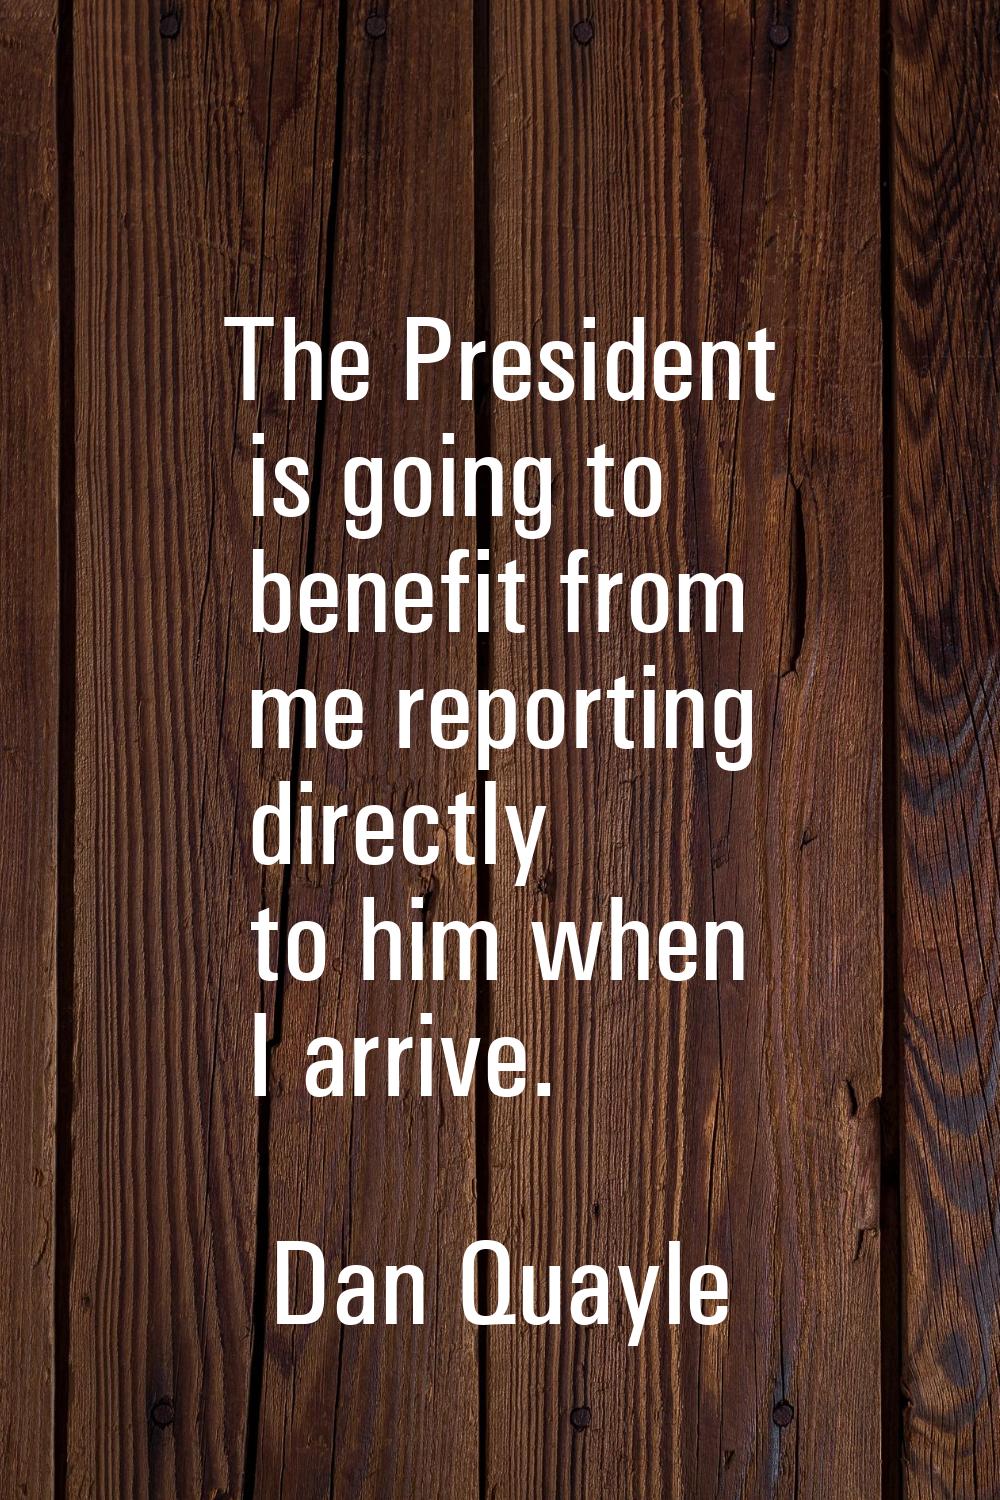 The President is going to benefit from me reporting directly to him when I arrive.